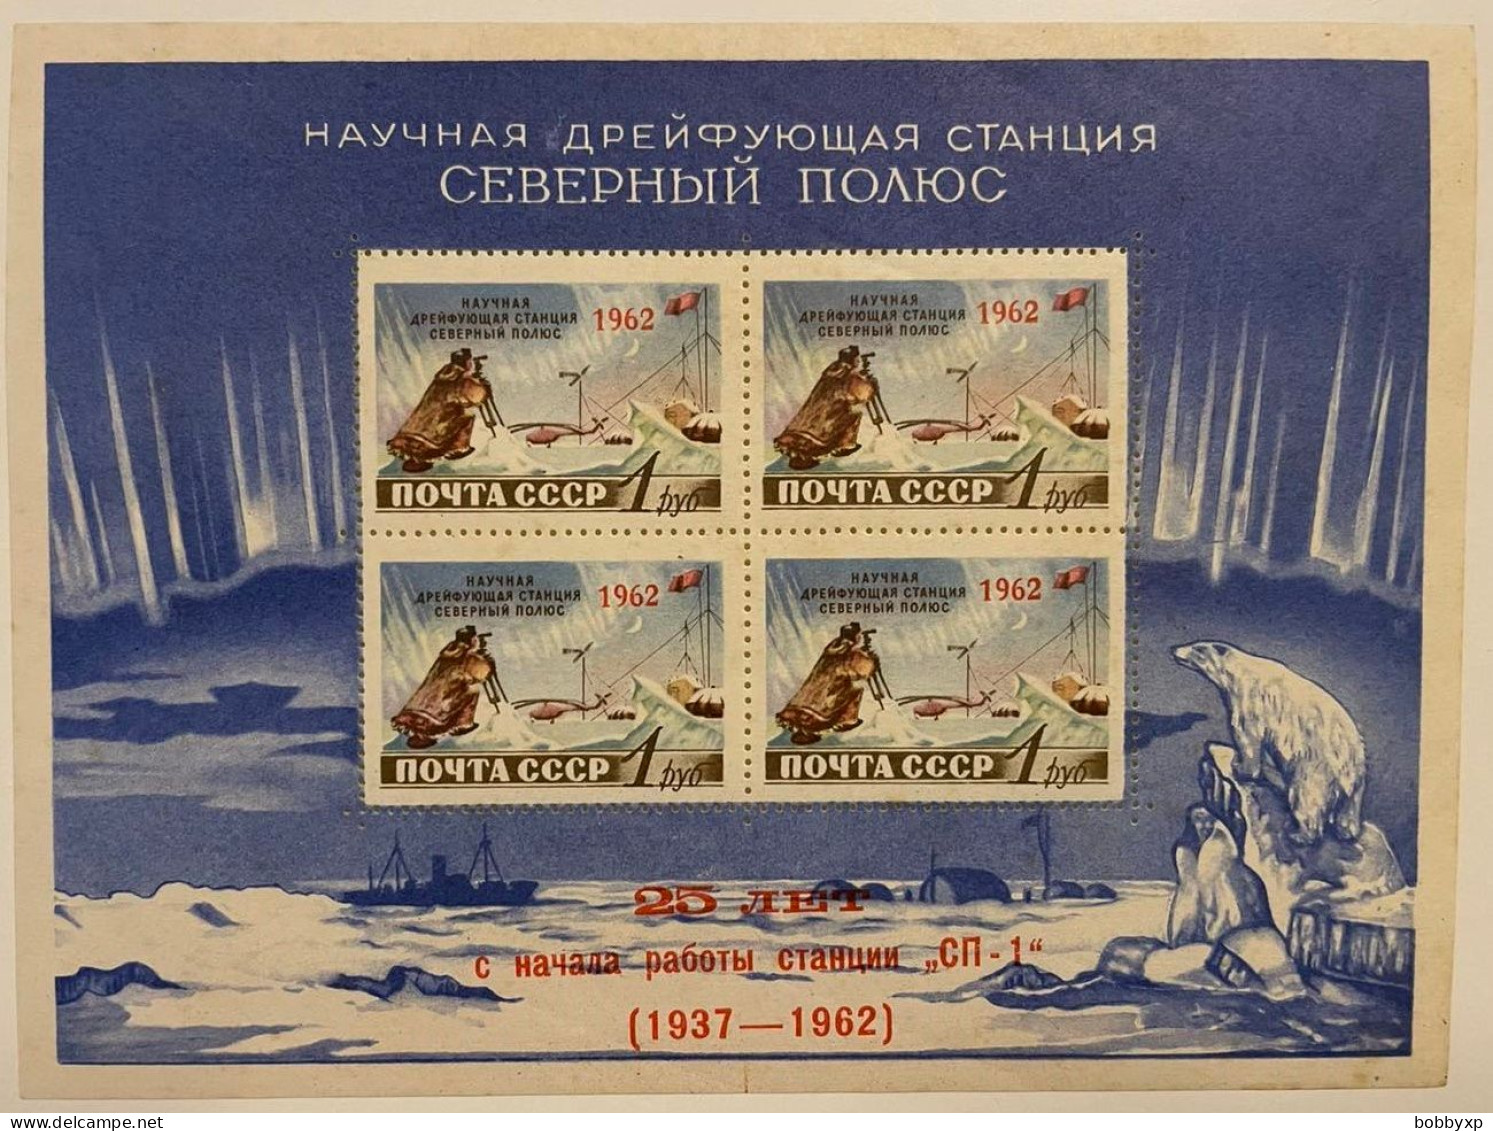 Russia. USSR 1962. Full Yearsets 148 Stamps & 3 Souvenir Sheet. MNH - Annate Complete